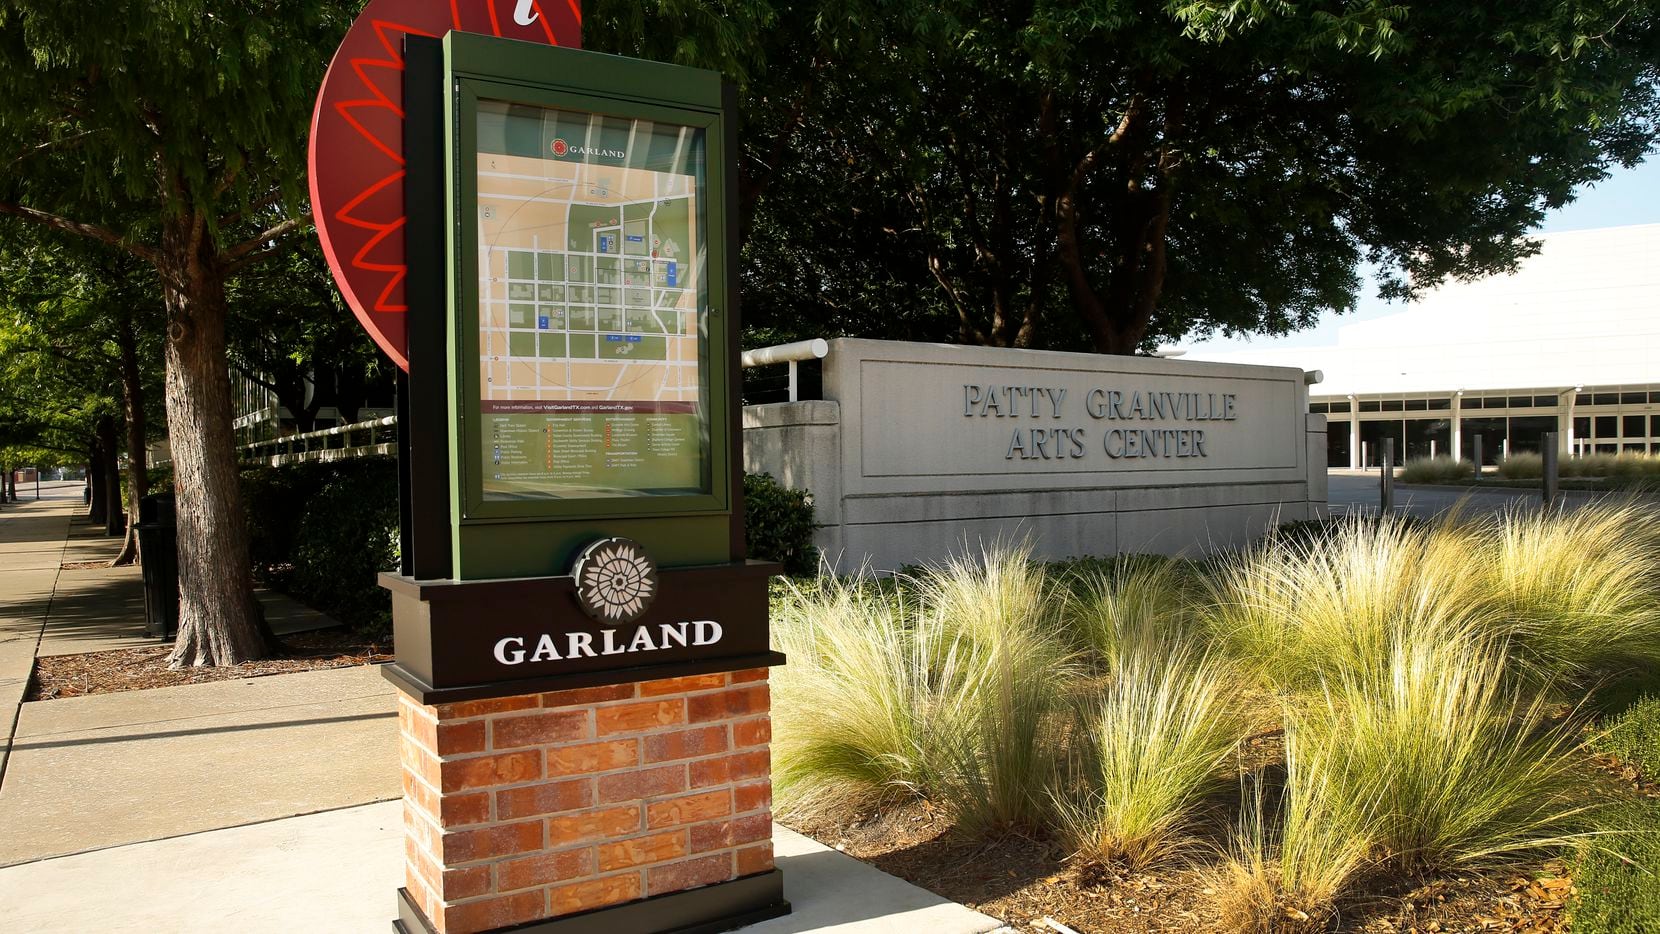 An information kiosk is pictured at Patty Granville Arts Center in downtown Garland, Texas, Friday, June 26, 2020.